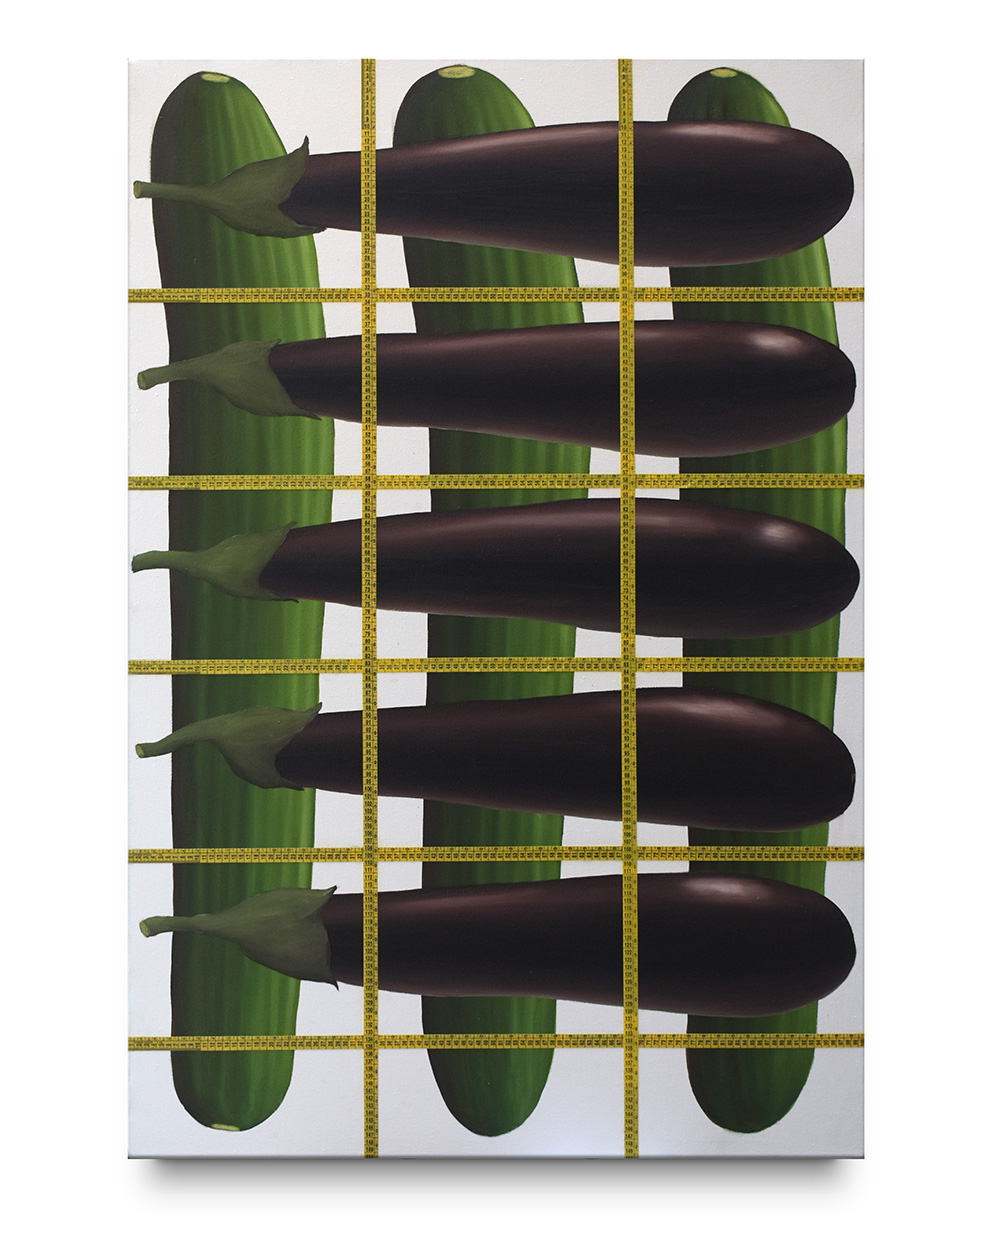 Regular Grid with Cucumbers and Eggplants, 2021, Plastic tape measure and oil on canvas, 100 x 150 CM